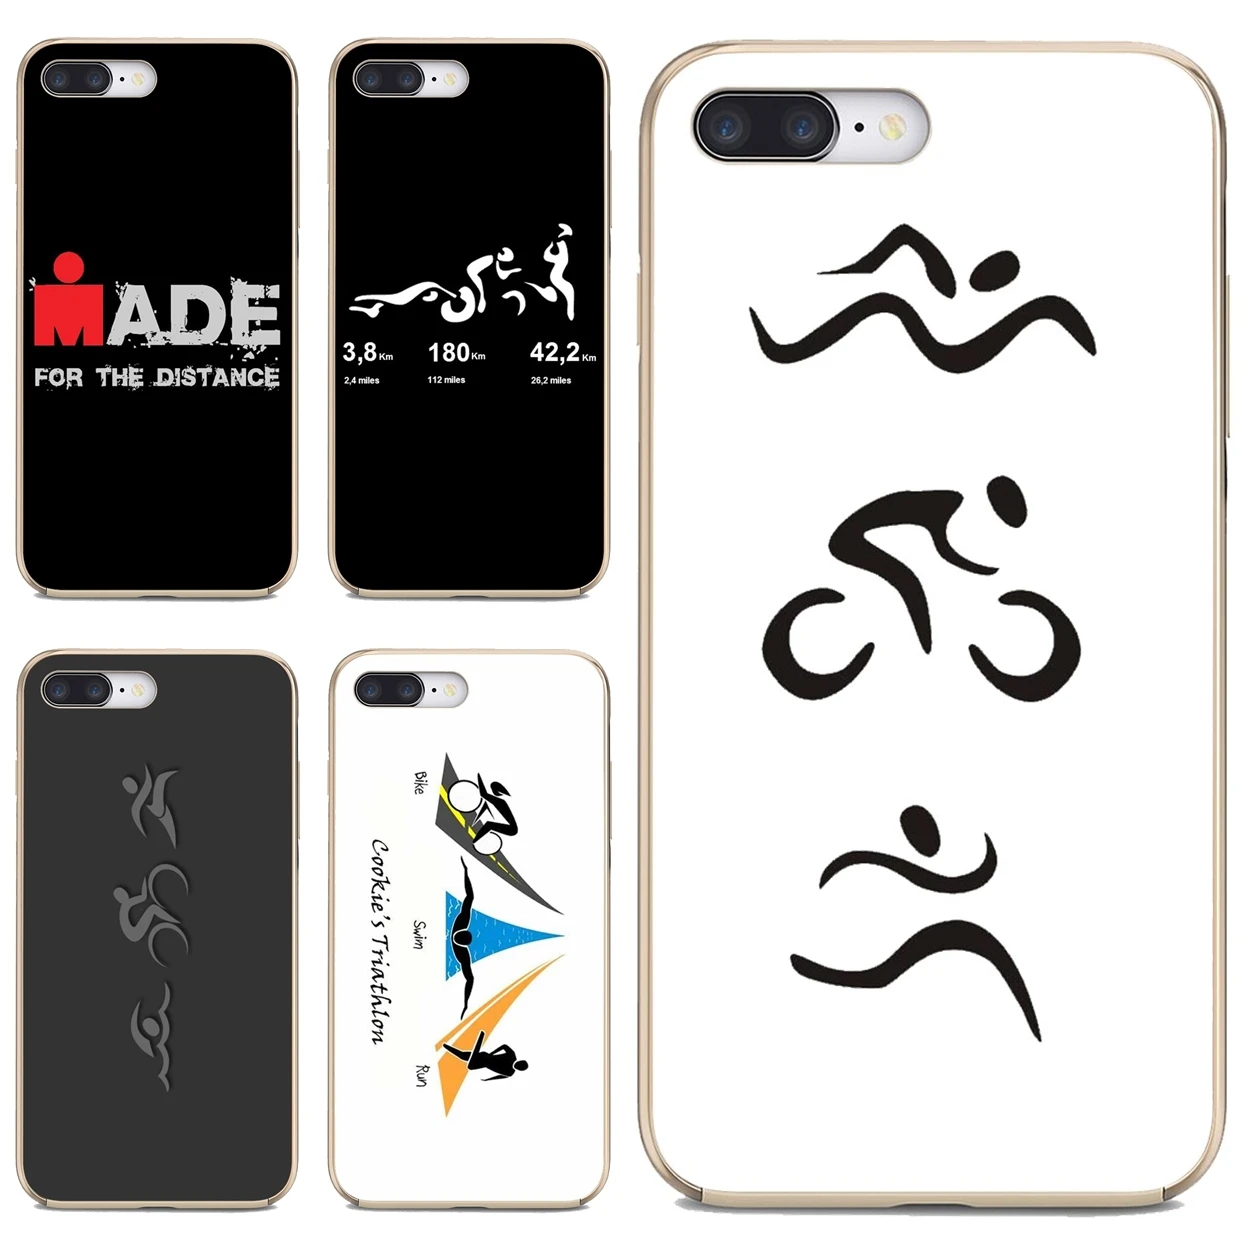 

Cell Phone Cover For iPod Touch iPhone 10 11 12 Pro 4S 5S SE 5C 6 6S 7 8 X XR XS Plus Max 2020 Item-Triathlon-Ironman